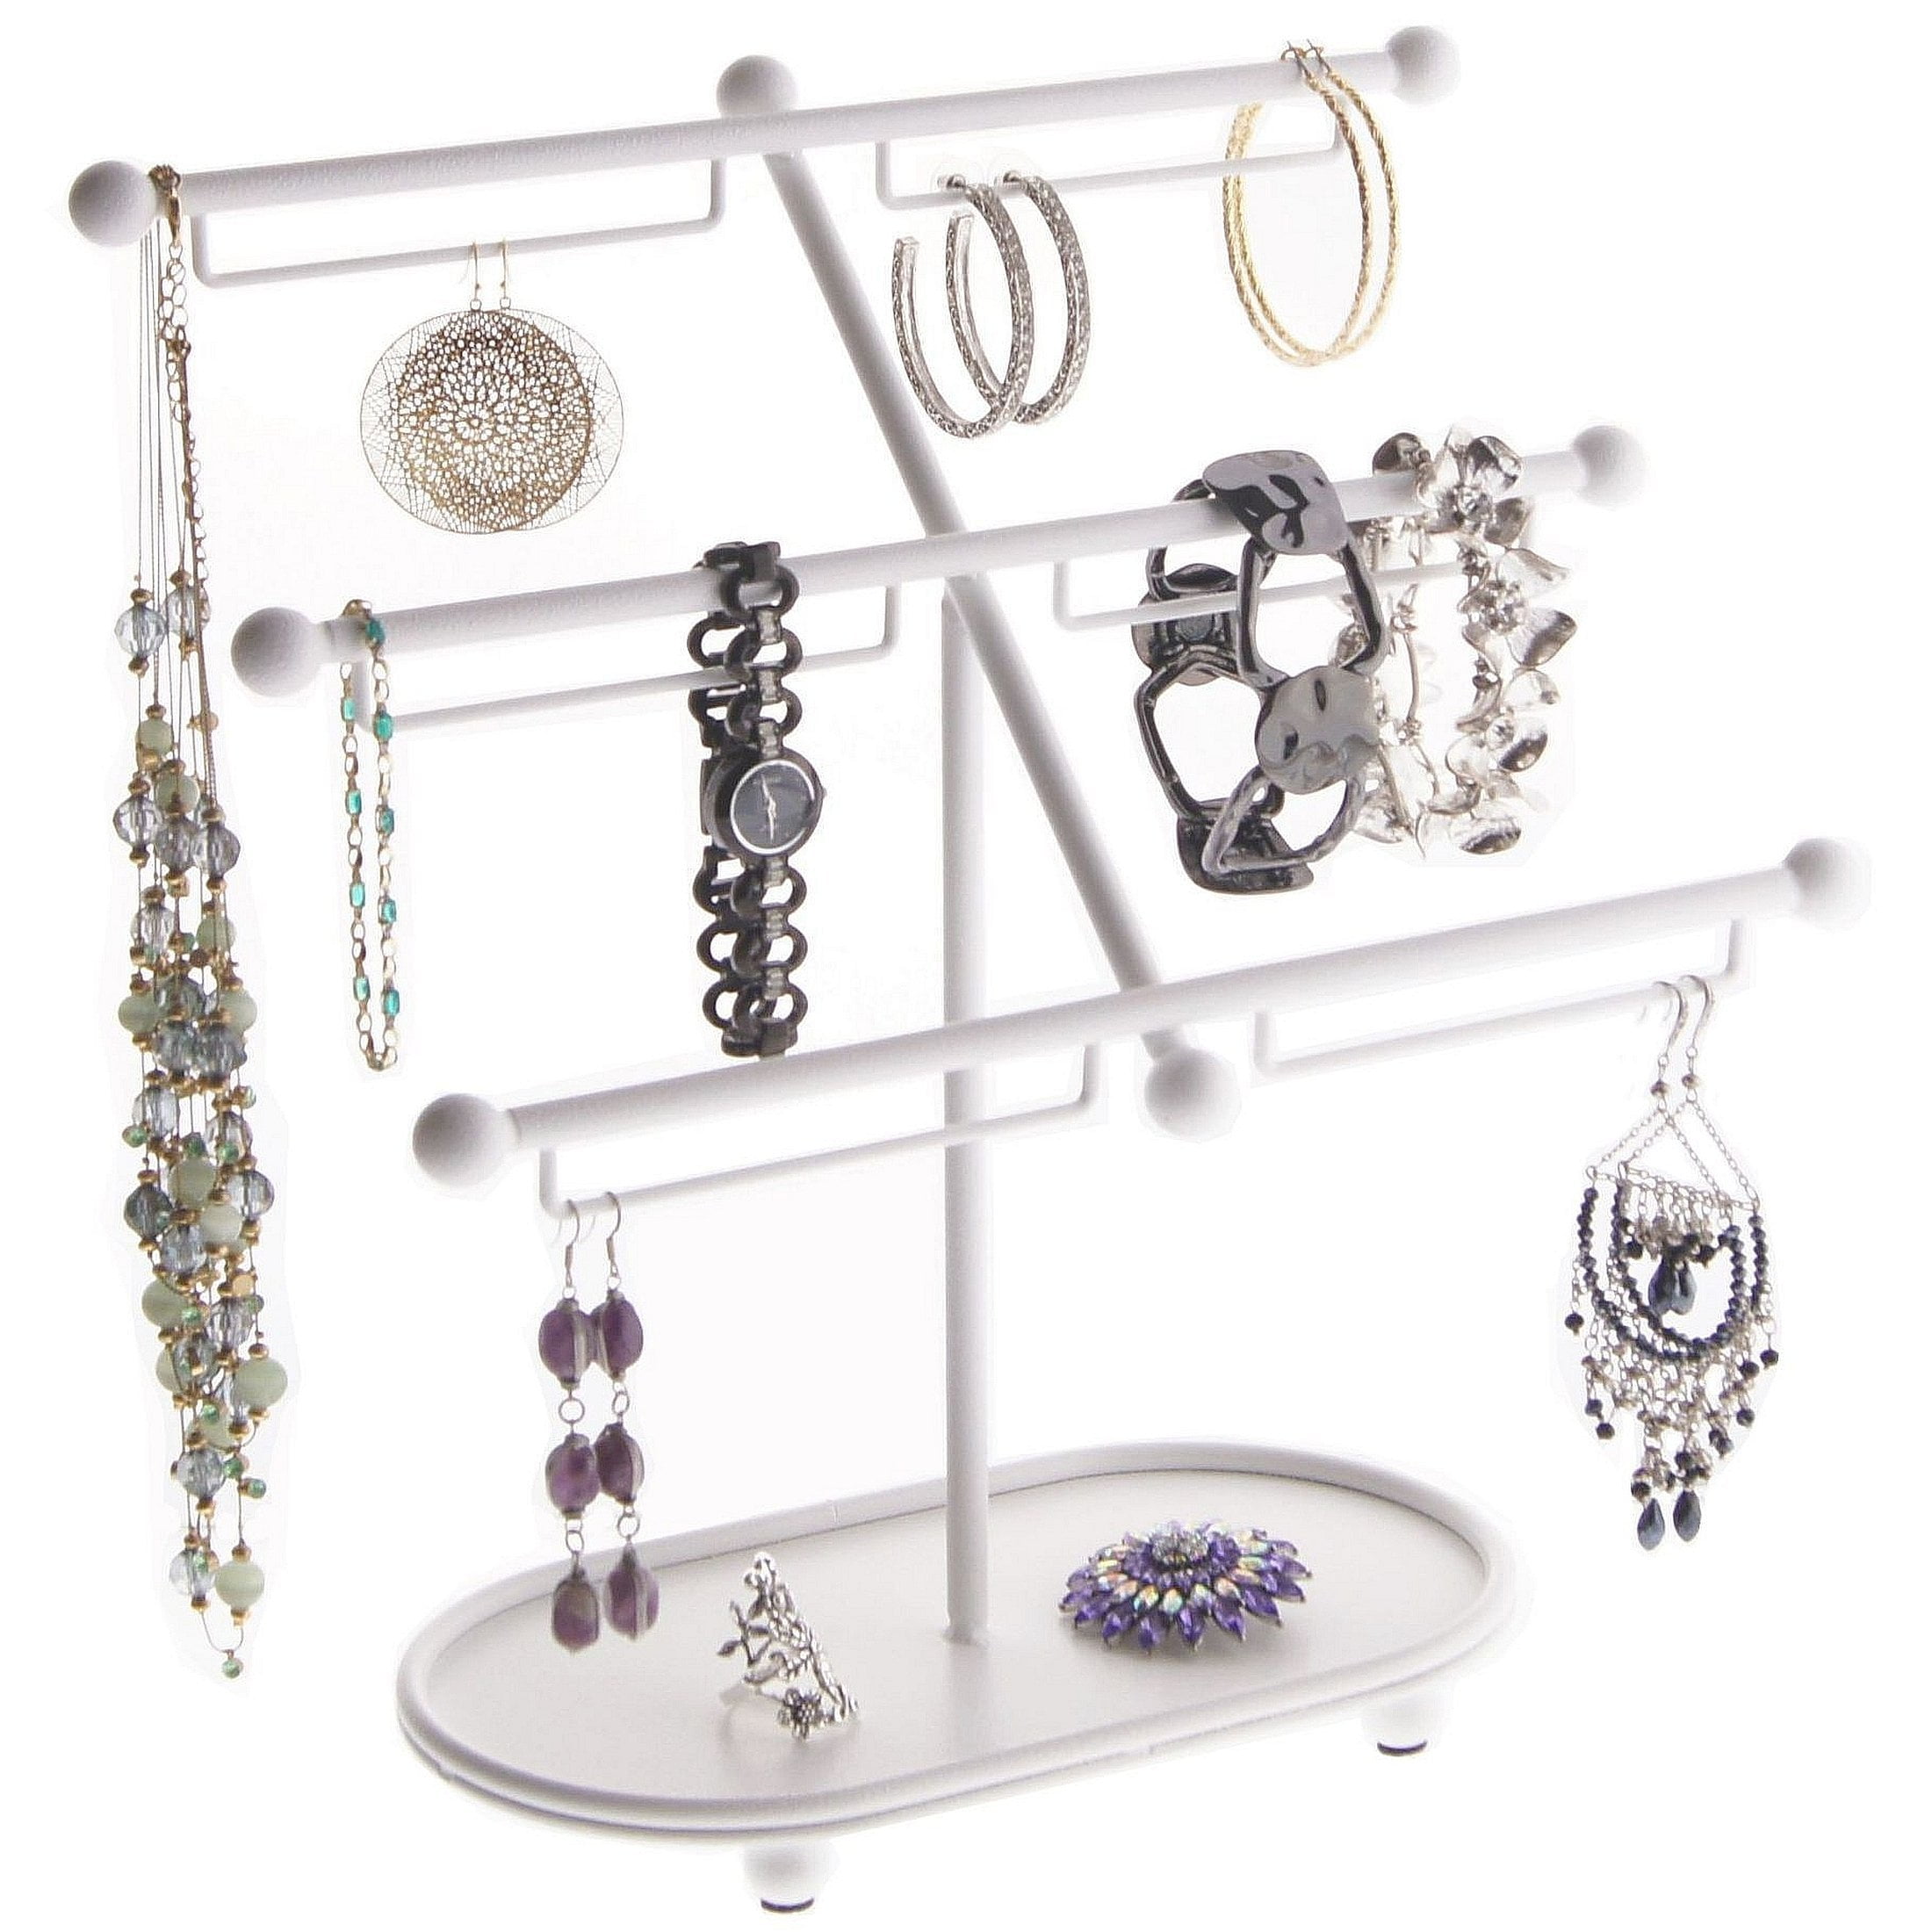 Details about   Earring Holder Display Rack Hook Jewelry Necklace Ring Organizer Hanging Stand 